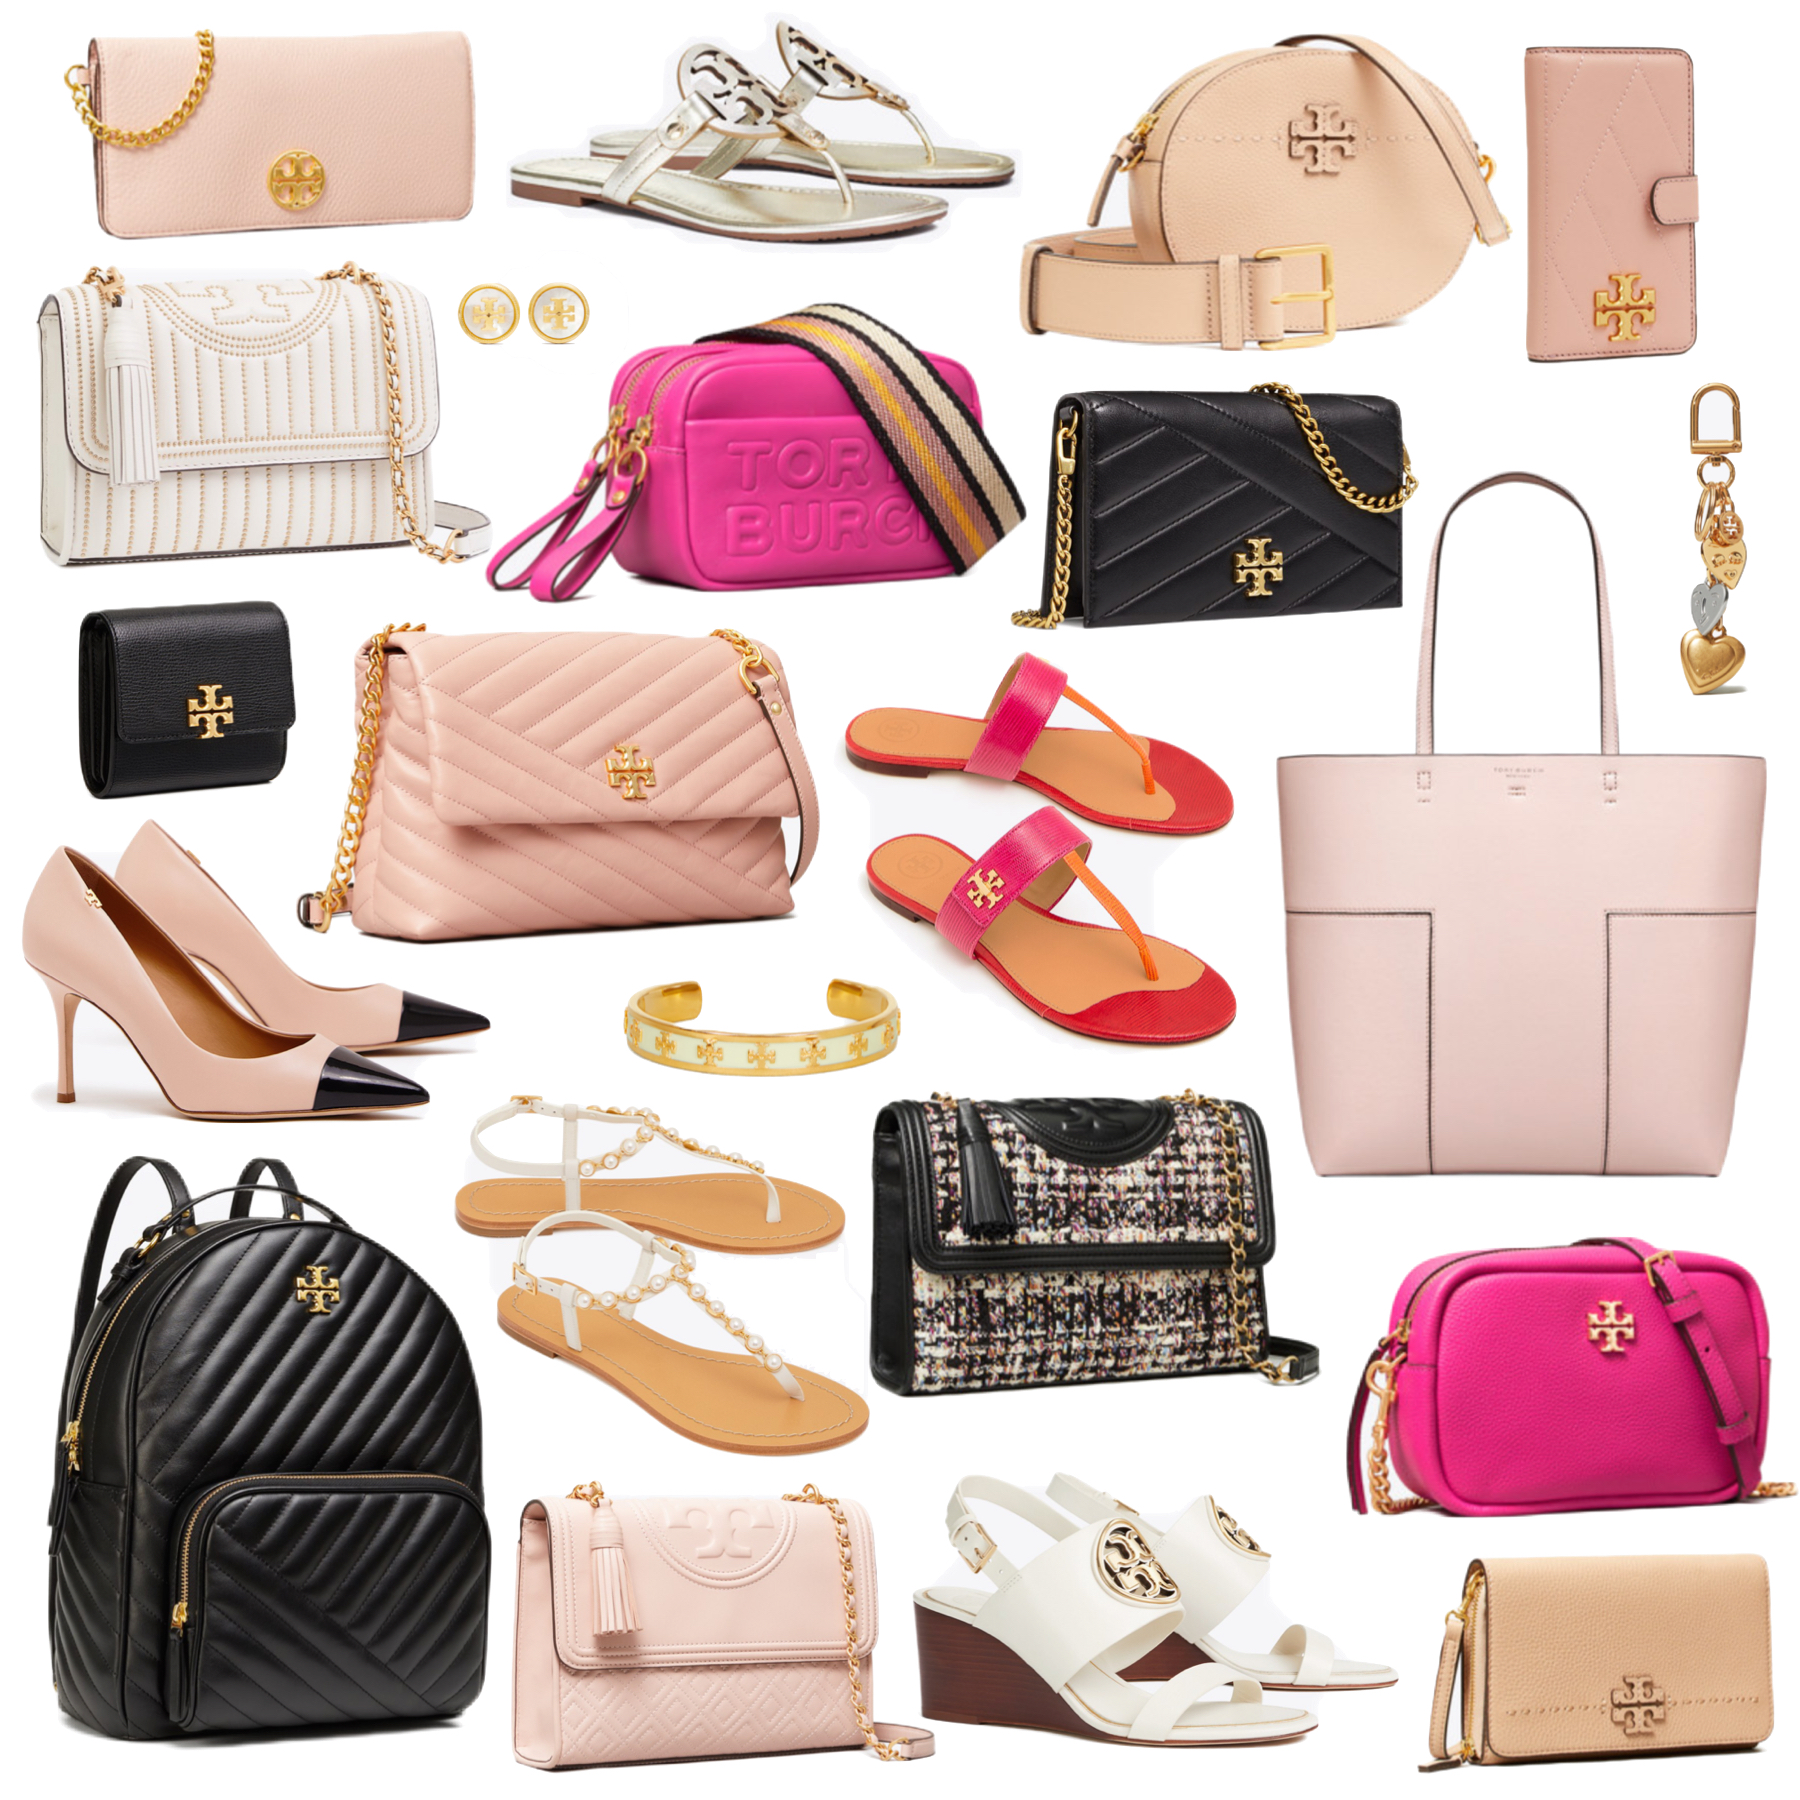 Tory Burch Private Sale!! Up To 70% Off! - The Double Take Girls